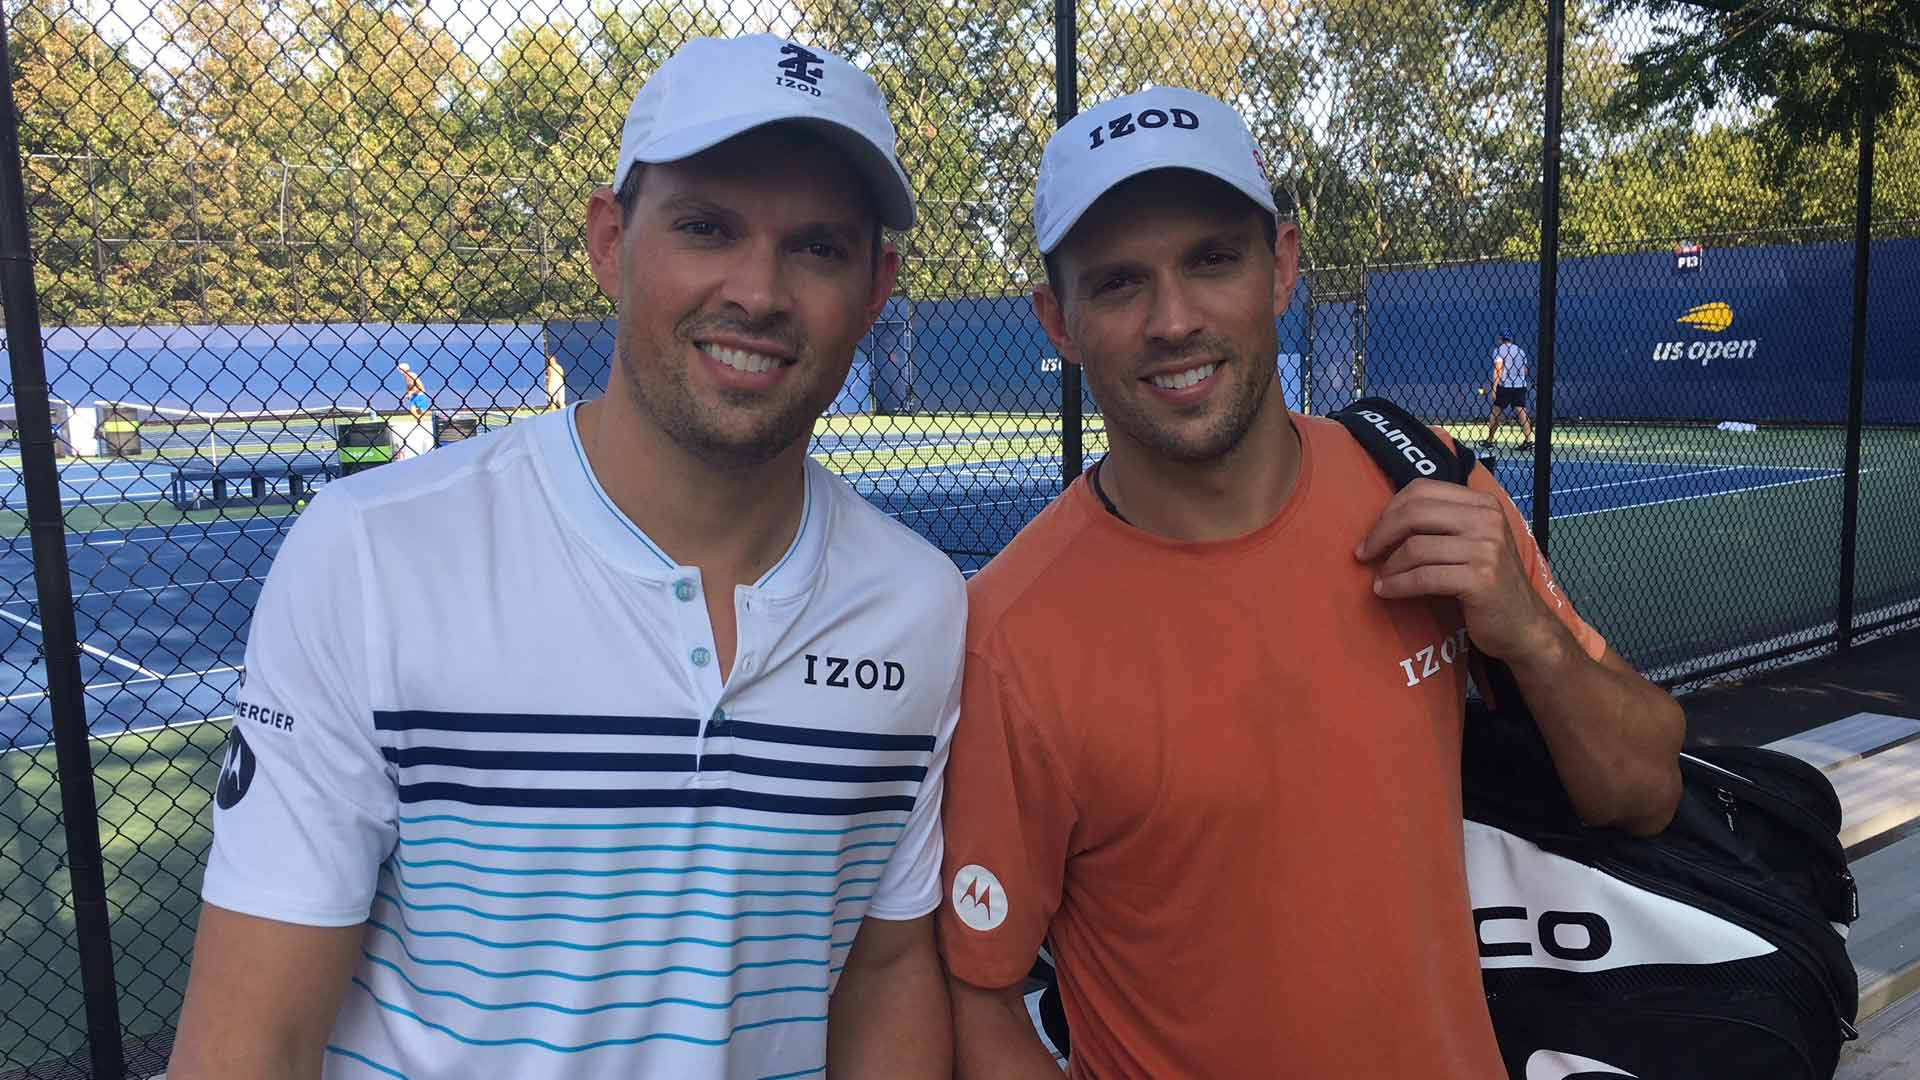 Prolific Tennis Duos, Bob Bryan and Mike Bryan, Smiling in Triumph Wallpaper